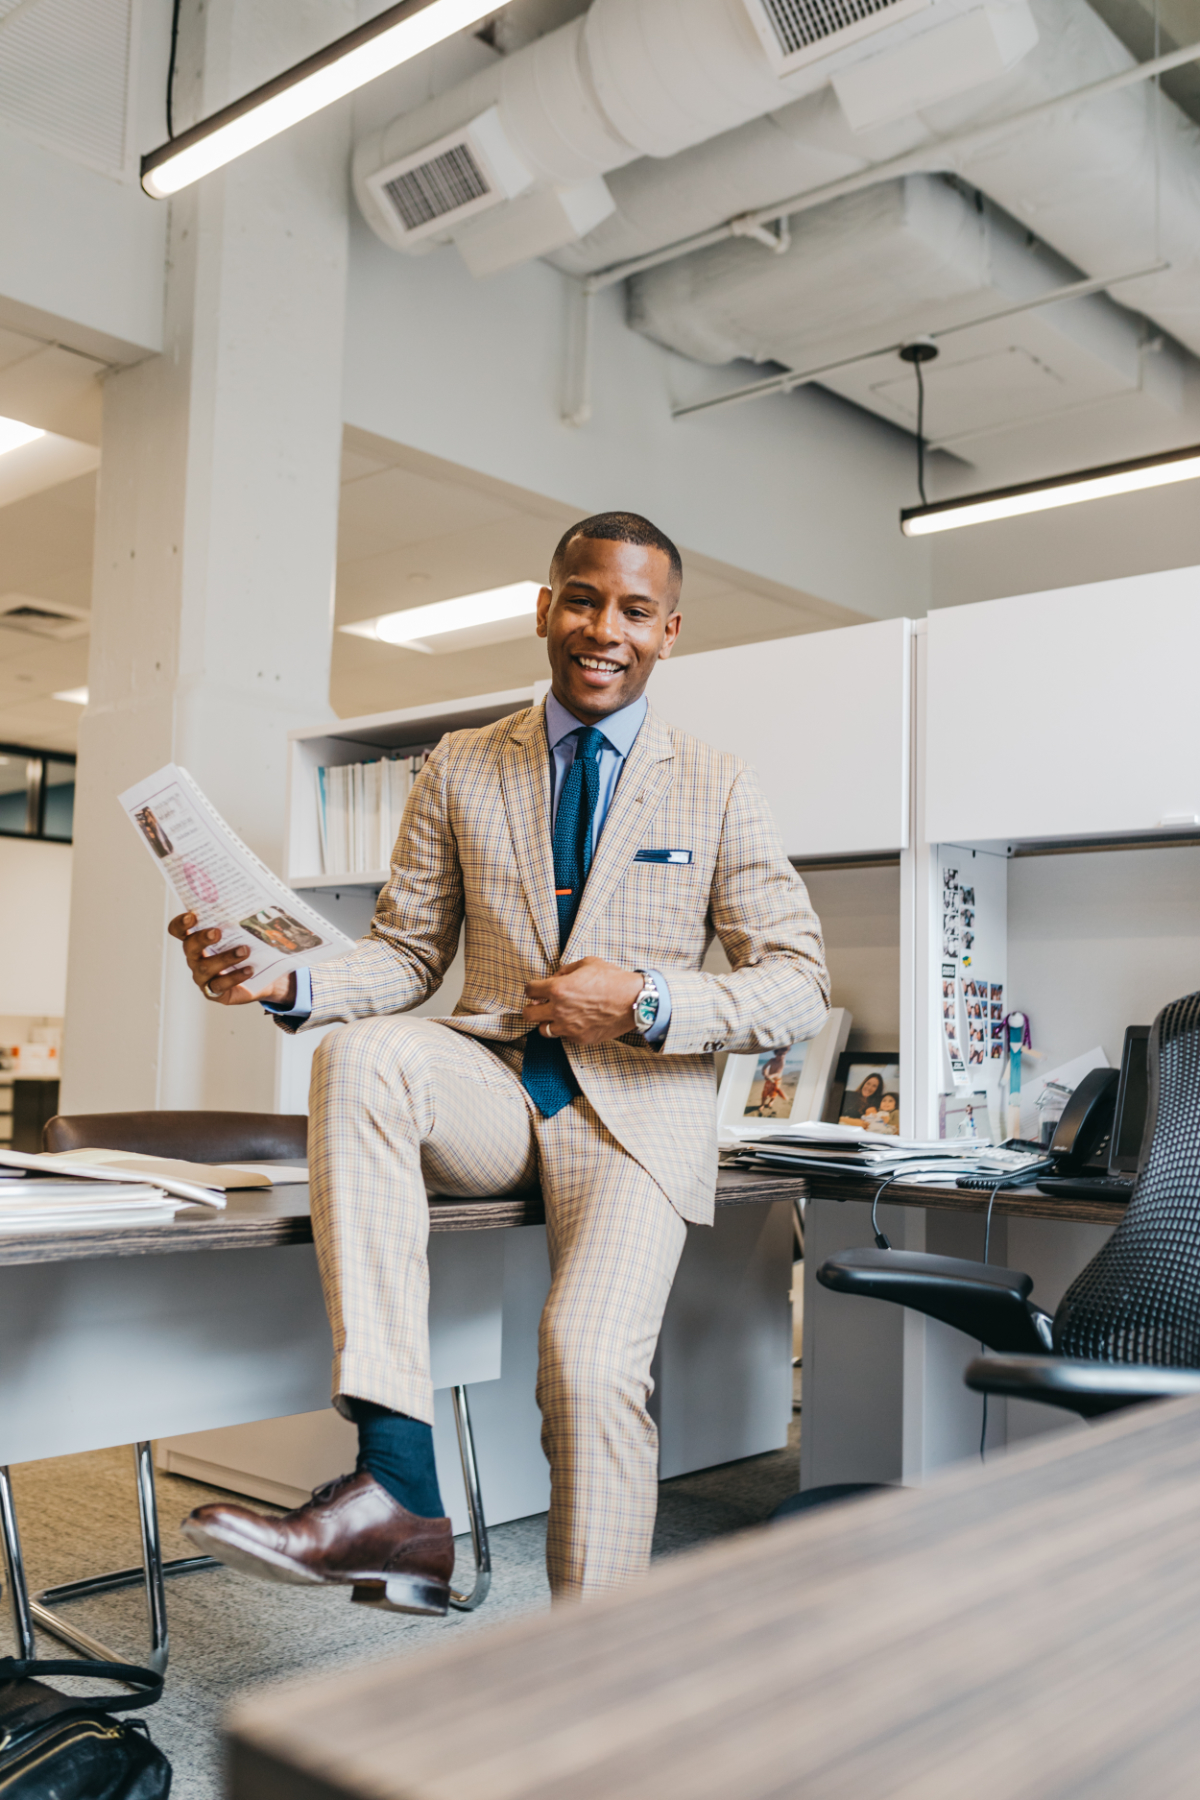 Sabir M. Peele of Men's Style Pro at Philly Mag Office wearing Lido Suit via ModaMatters